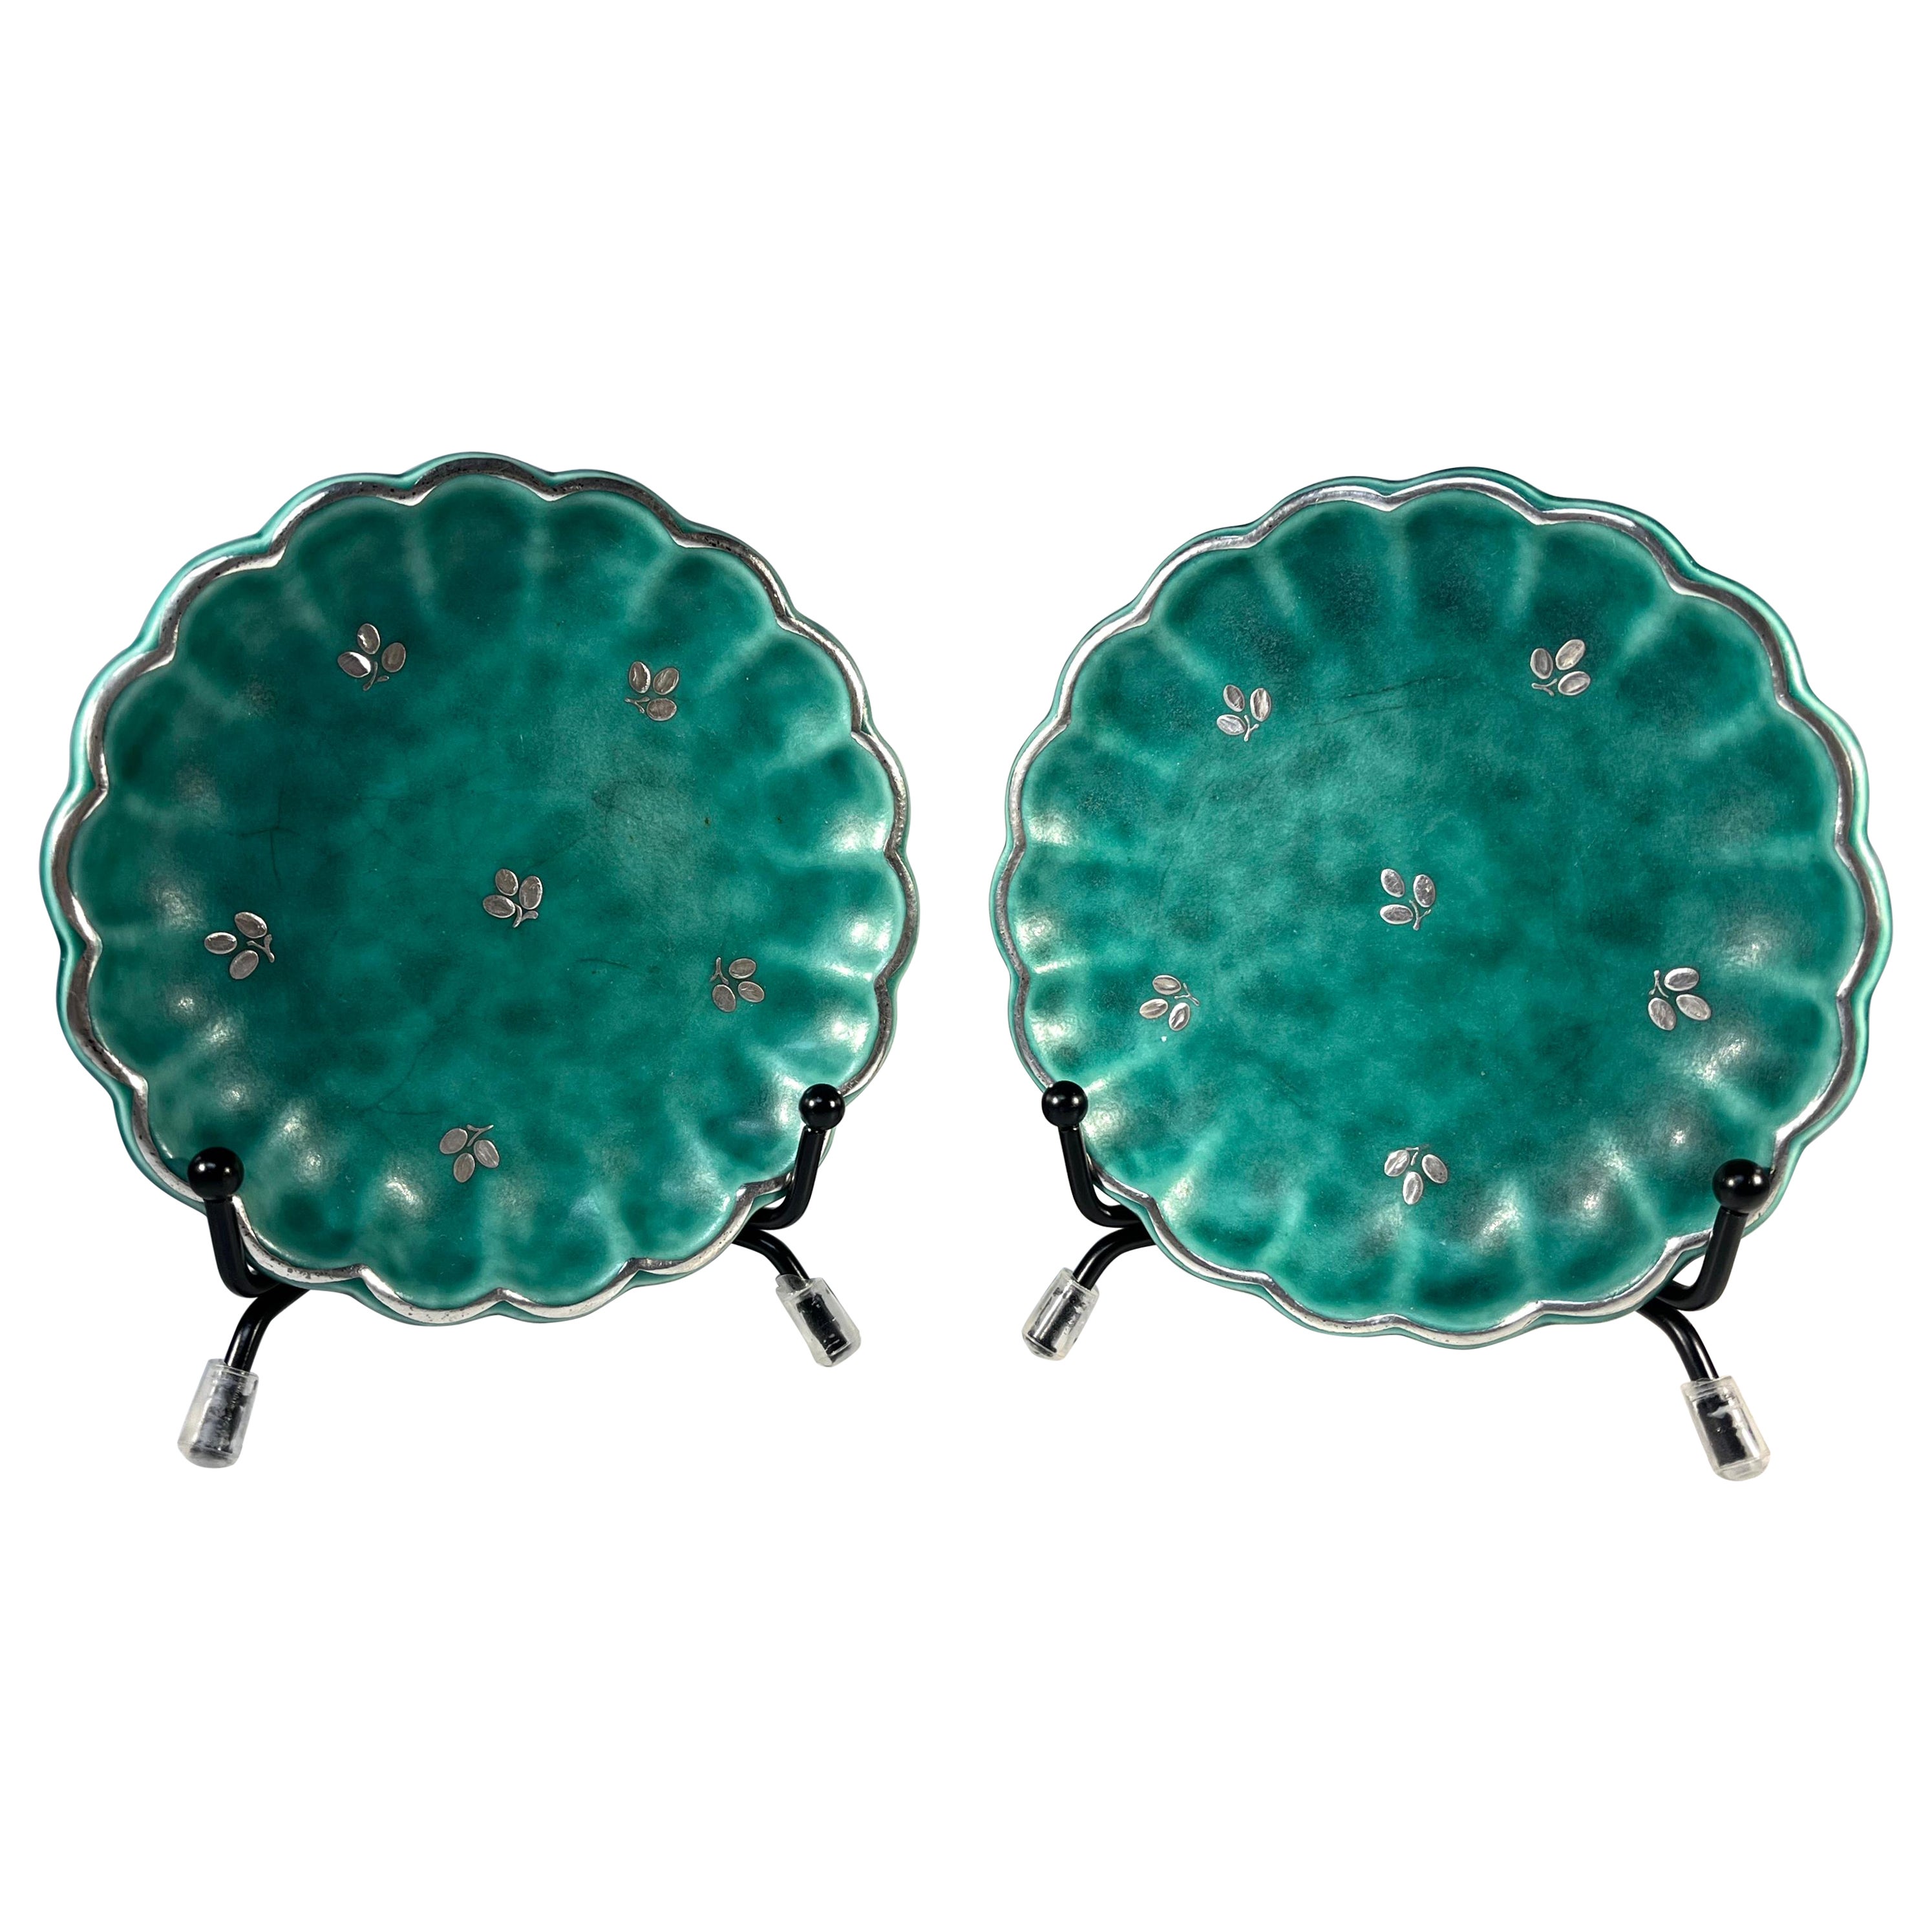 Pair Of Scalloped, Applied Silver Pin Trays, Wilhelm Kage, Argenta, Gustavsberg